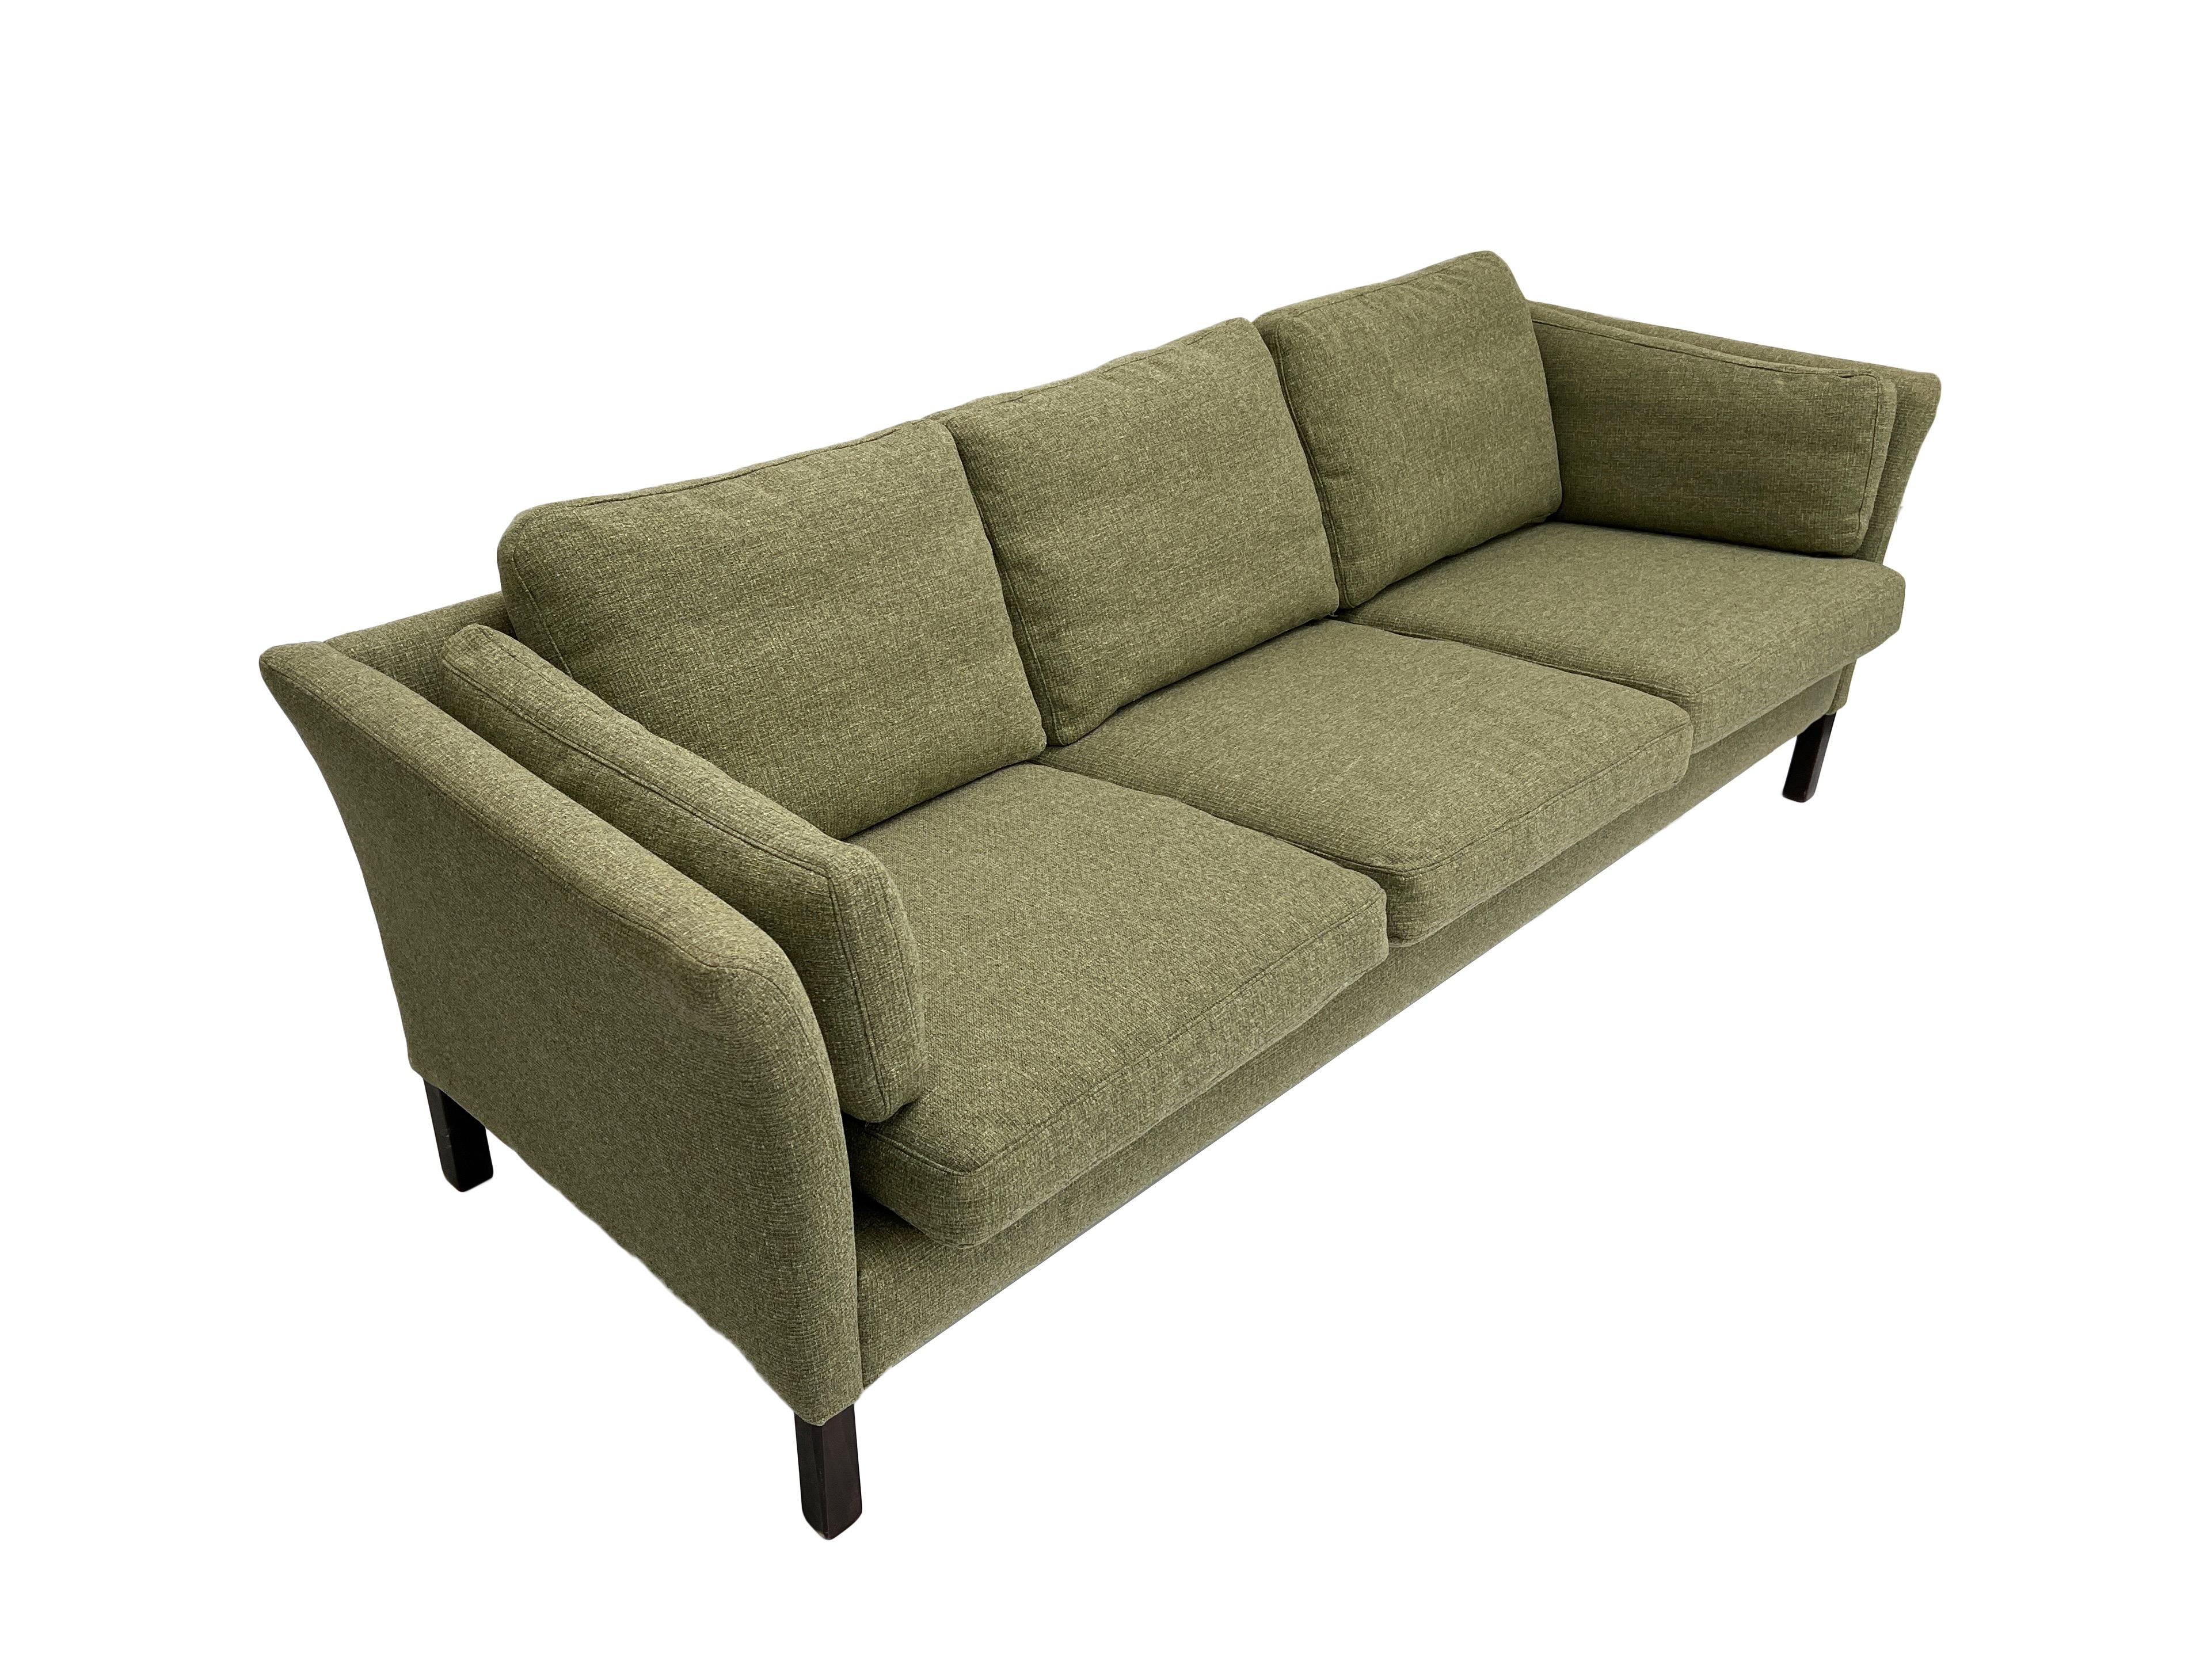 A beautiful Danish sage green wool 3 seater sofa by Mogens Hansen, this would make a stylish addition to any living or work area.

The sofa has wide seats and padded armrests for enhanced comfort. A striking piece of classic Scandinavian